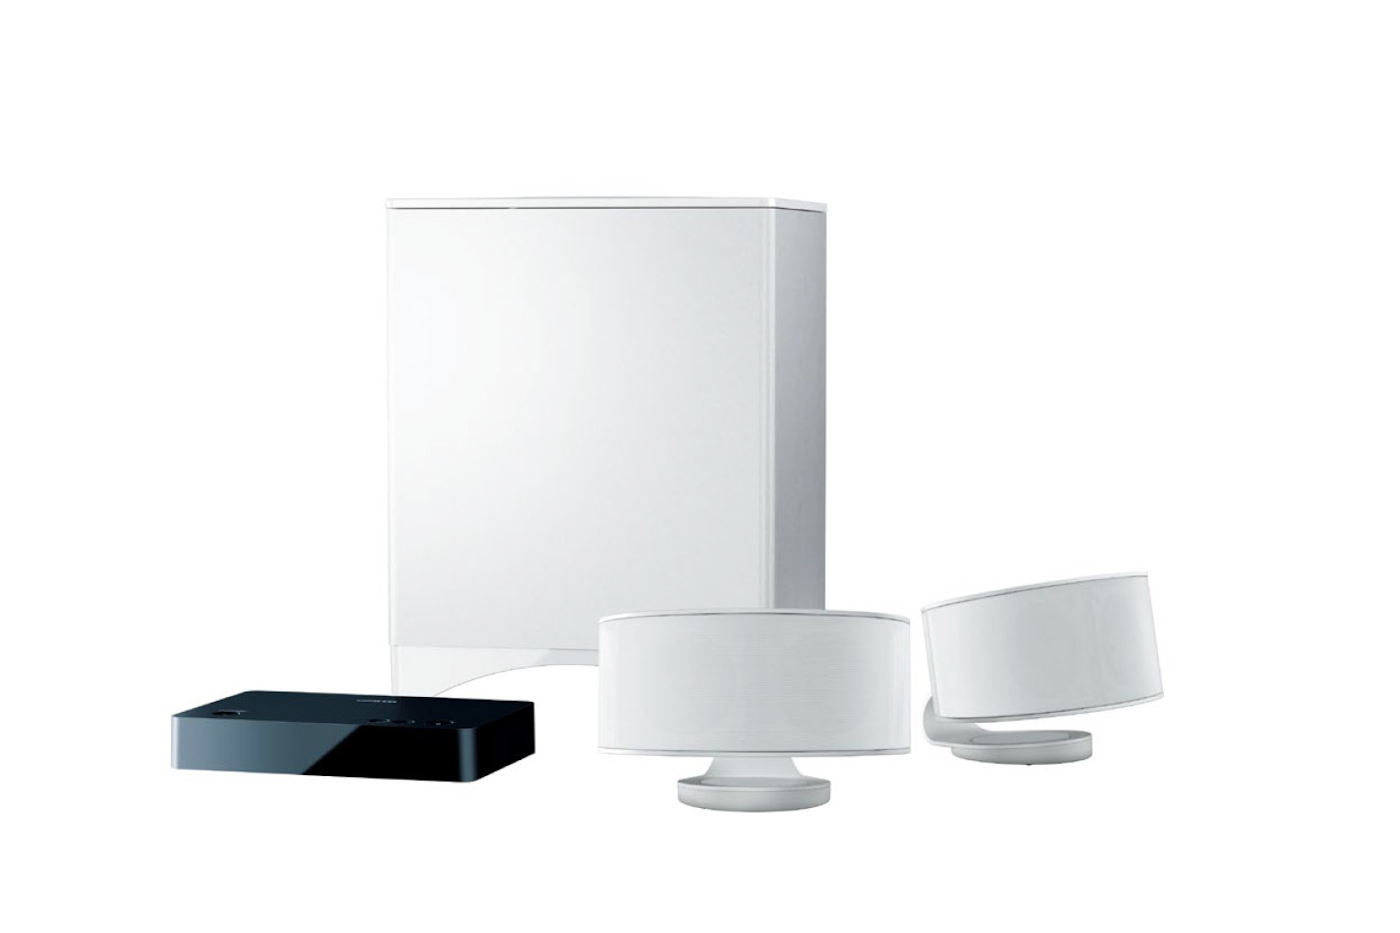 LS-3100 home audio system on white background